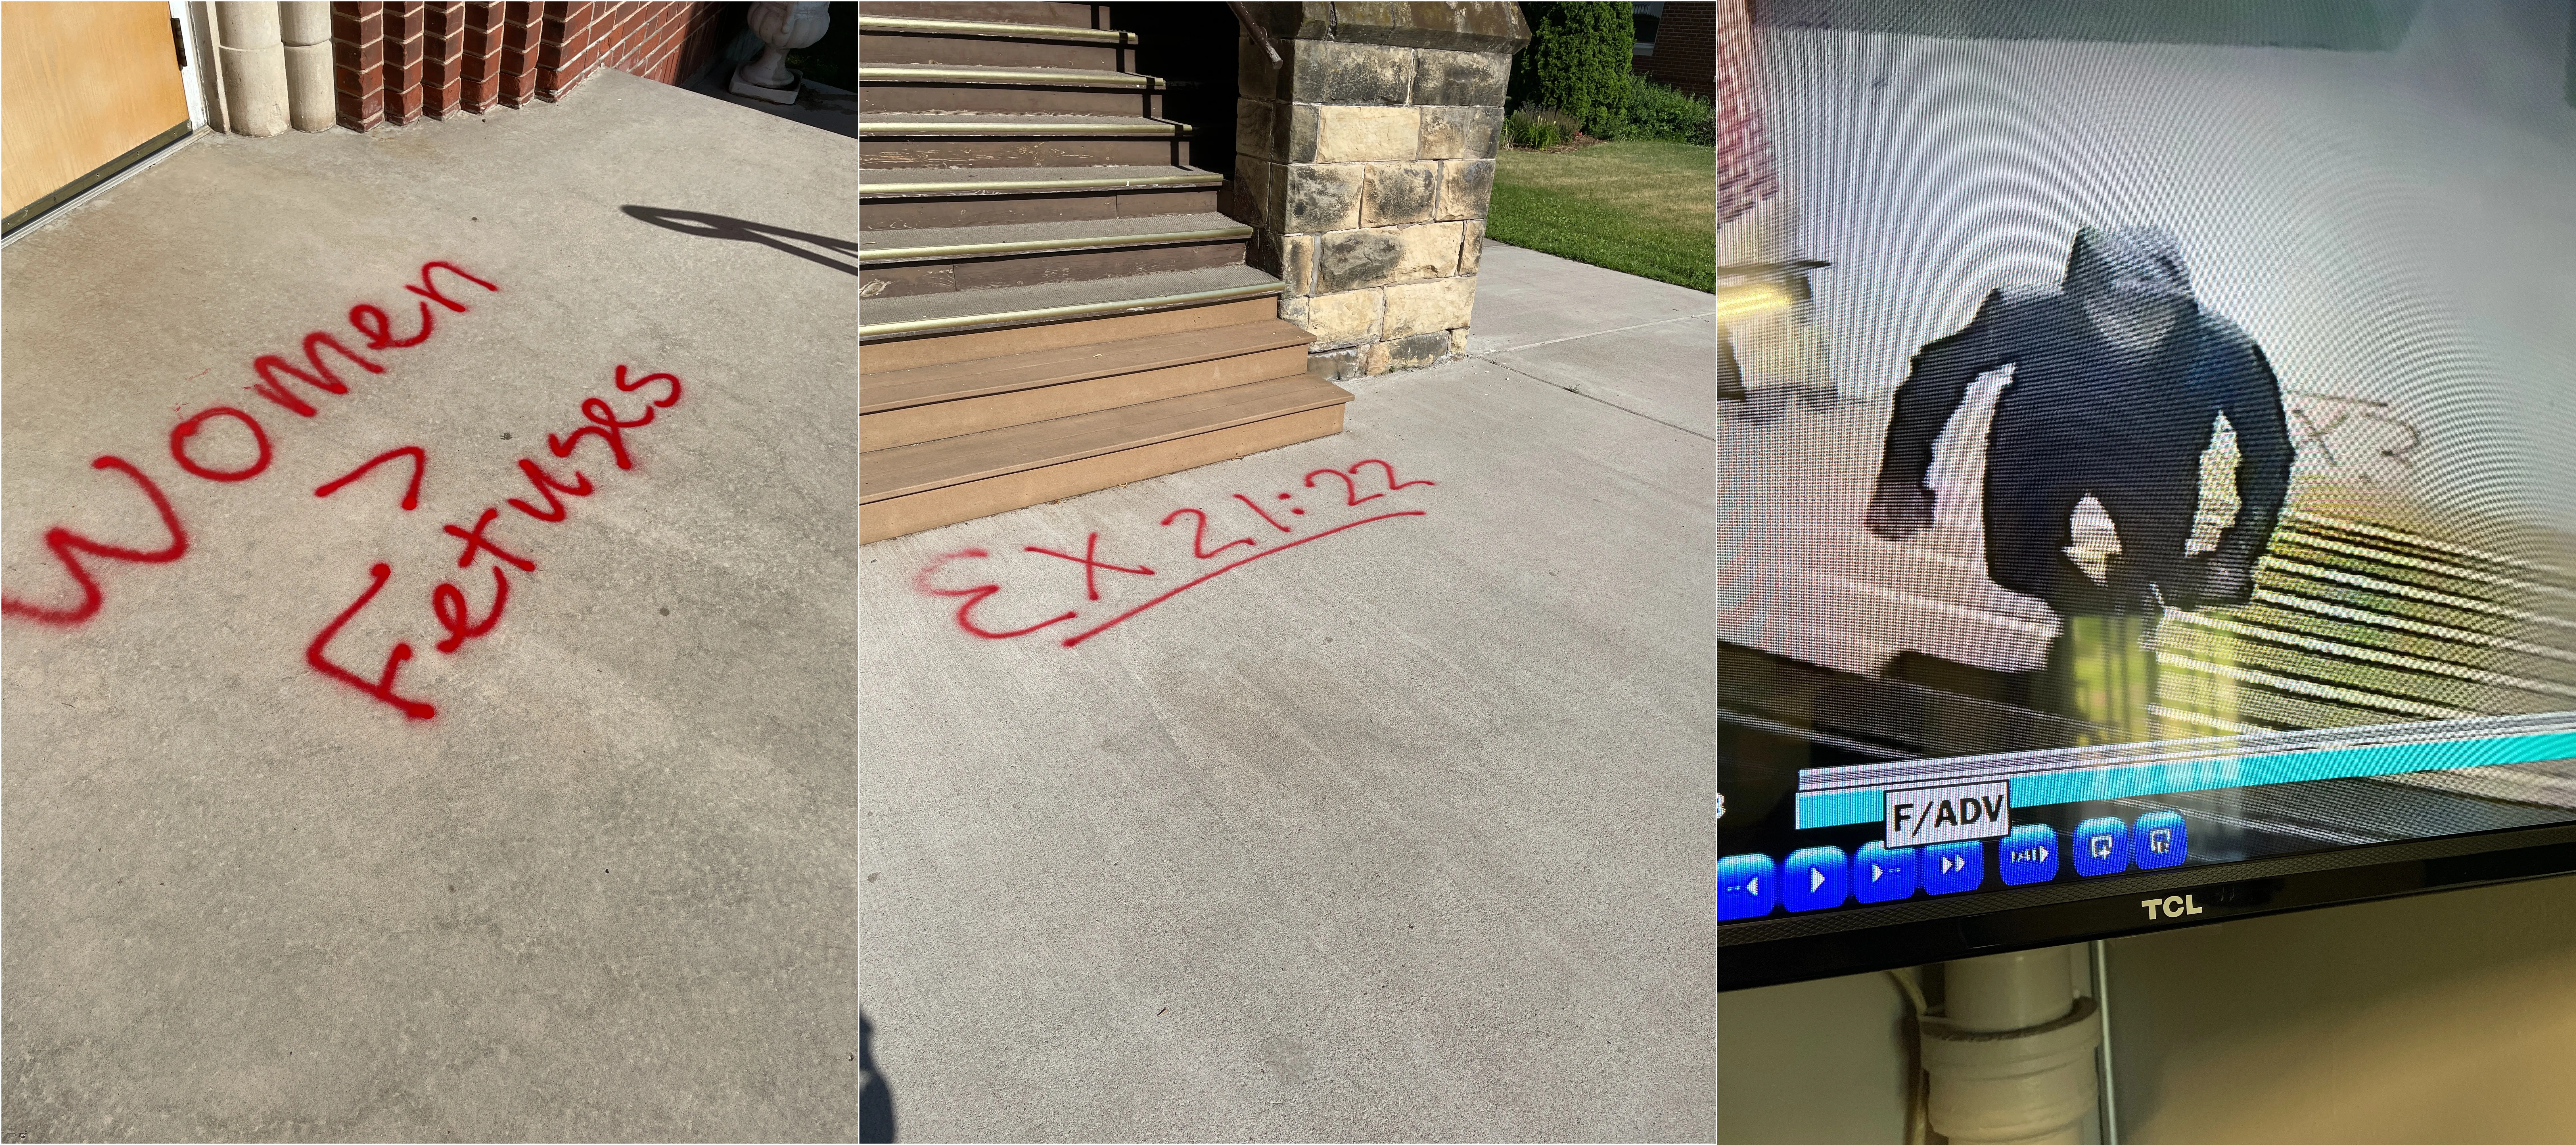 A perpetrator caught on camera vandalized St. Peter the Apostle Catholic Church and School in Bloomer, Wisconsin,  the night of July 2-3.?w=200&h=150